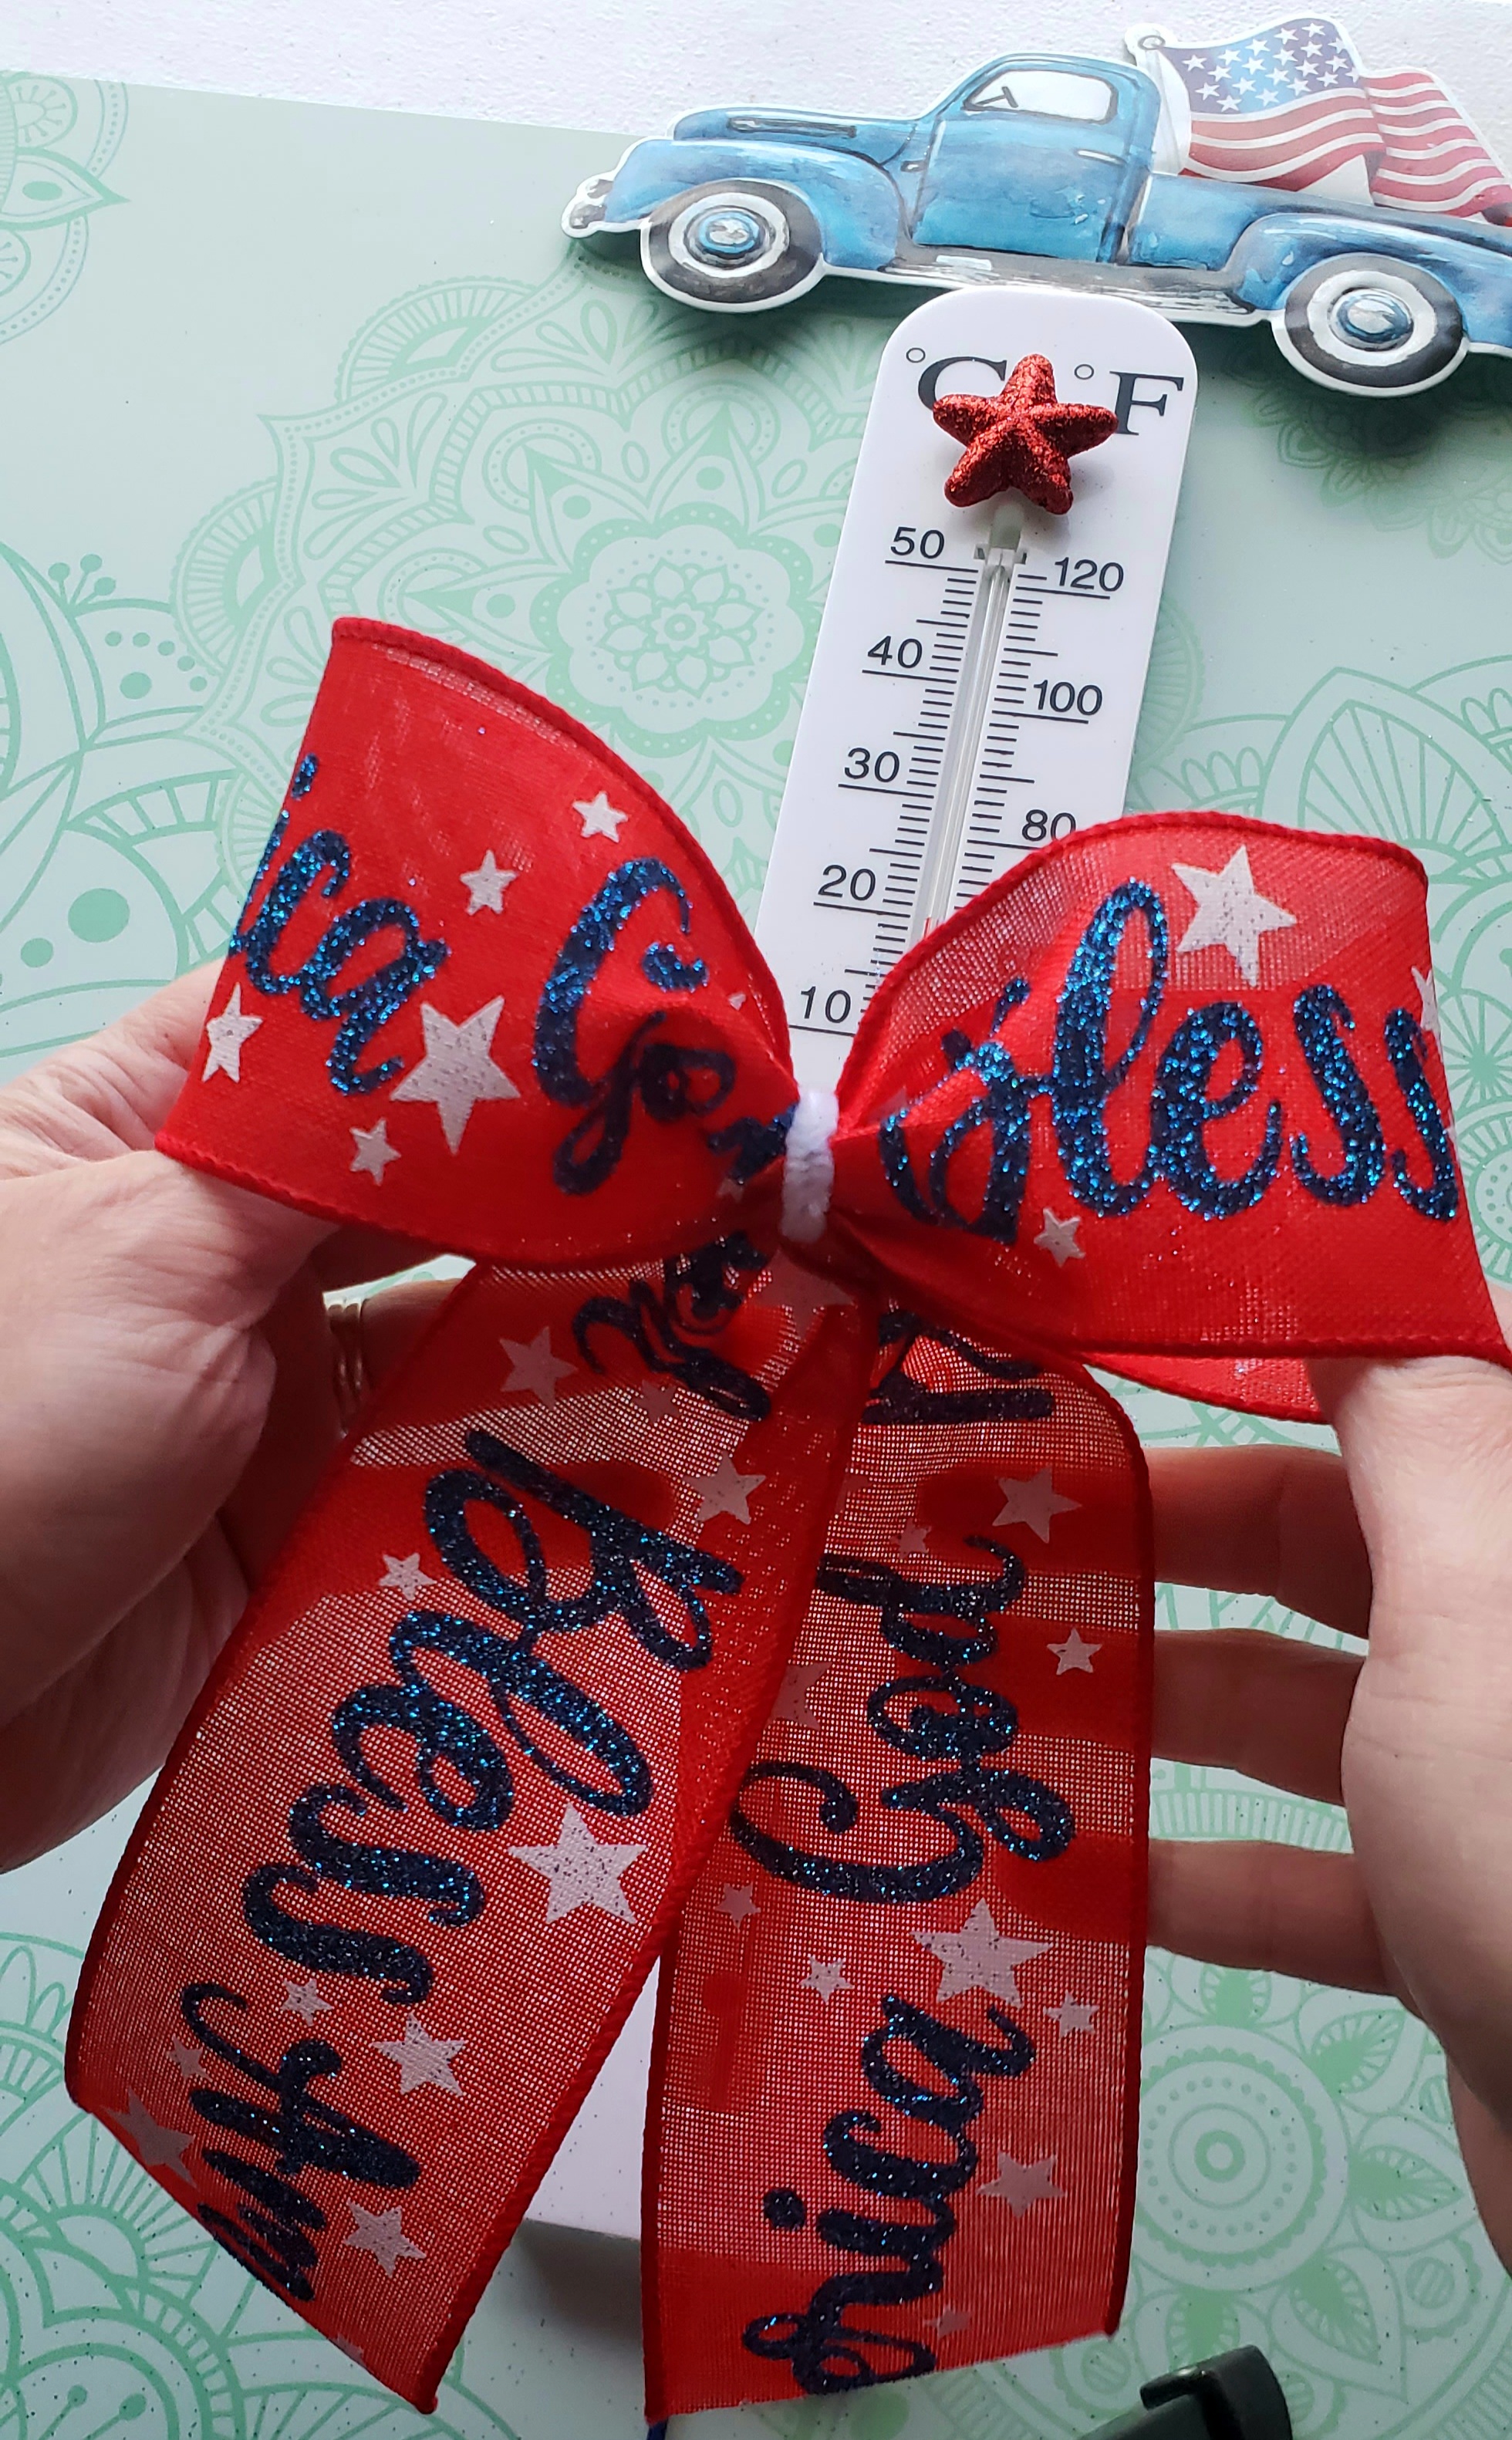 A bow made with patriotic ribbon to place at the bottom of the red, white, and blue outdoor thermometer.